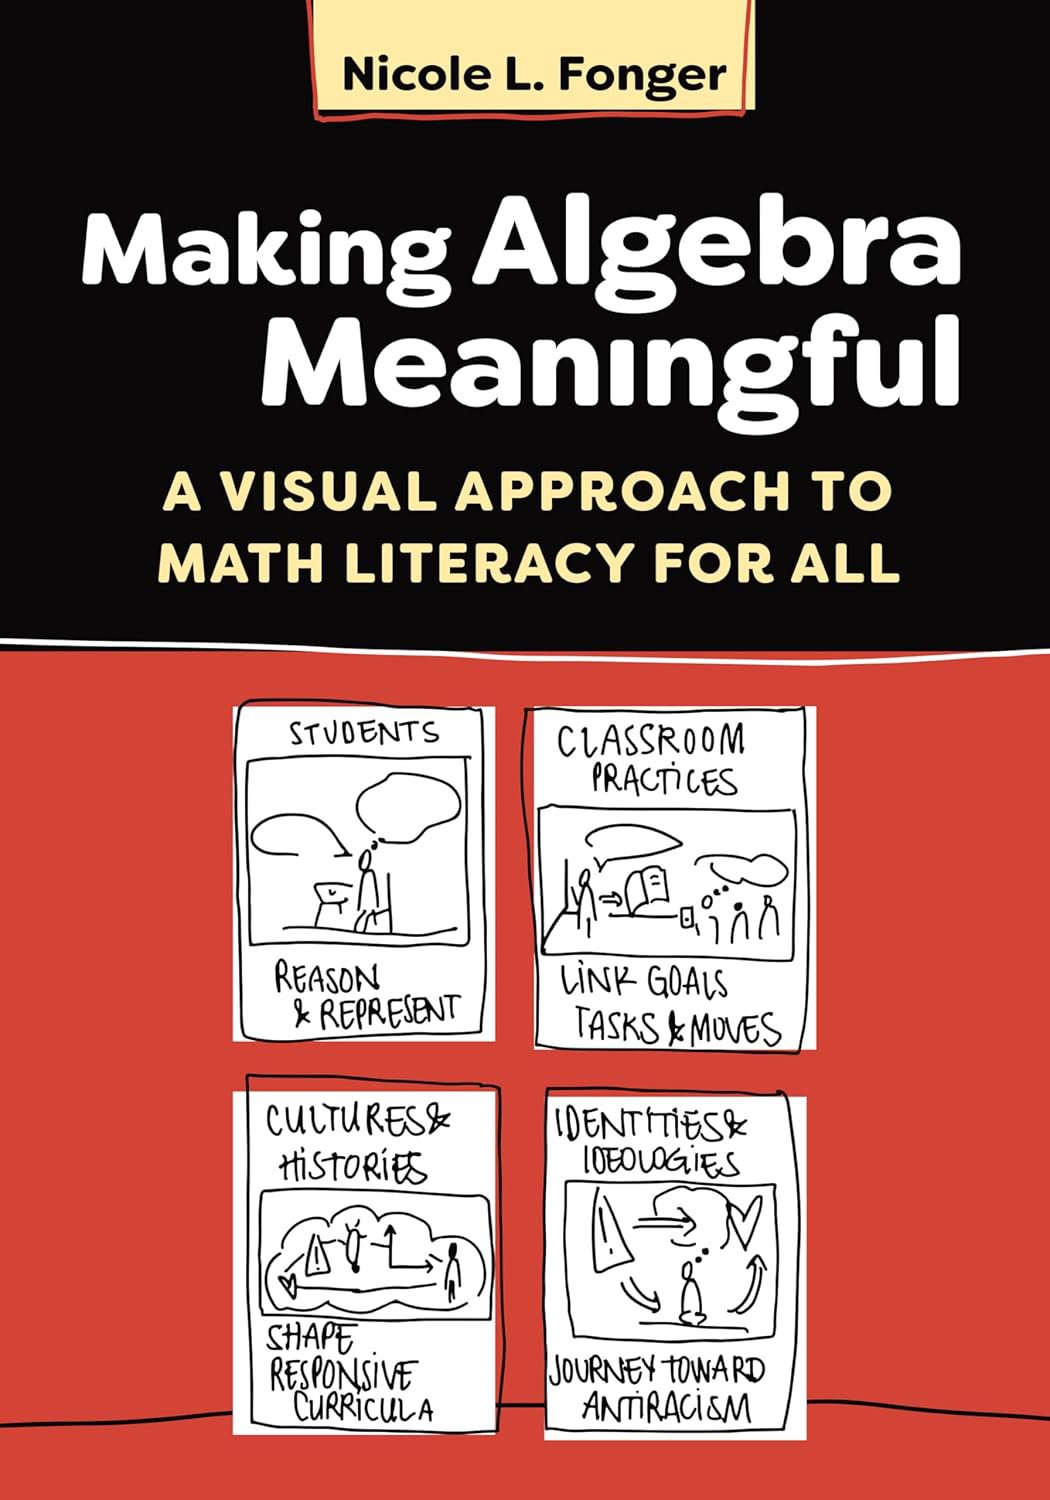 Making Algebra Meaningful: A Visual Approach to Math Literacy for All